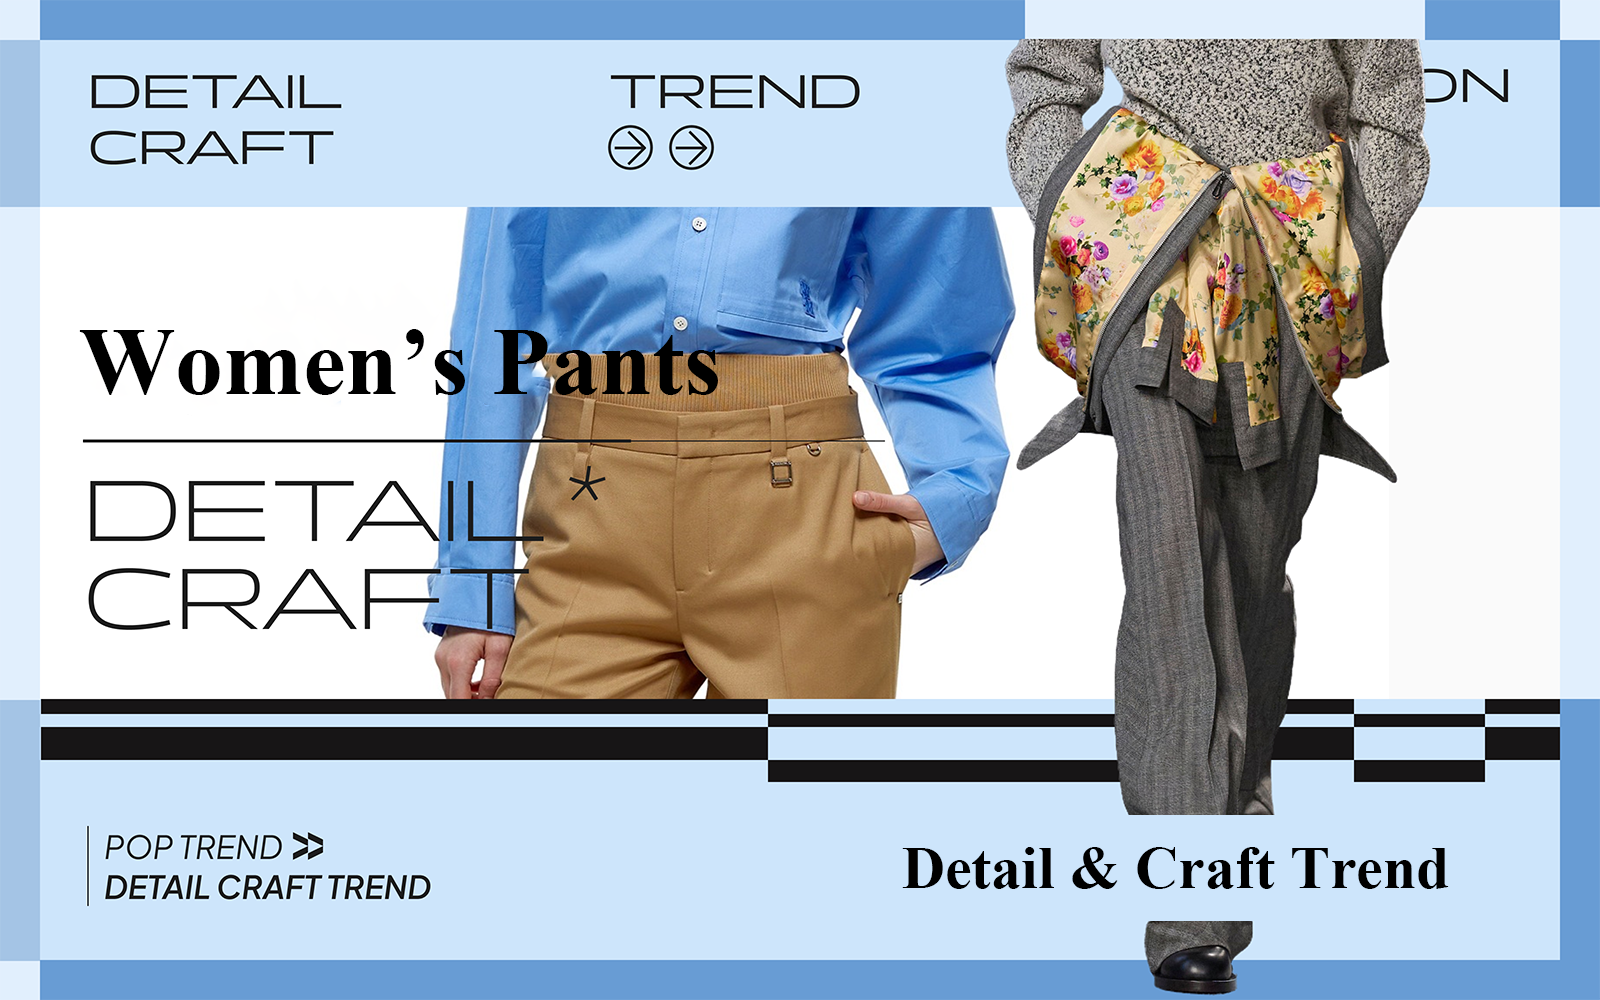 Fashion Focus -- The Detail & Craft Trend for Women's Pants